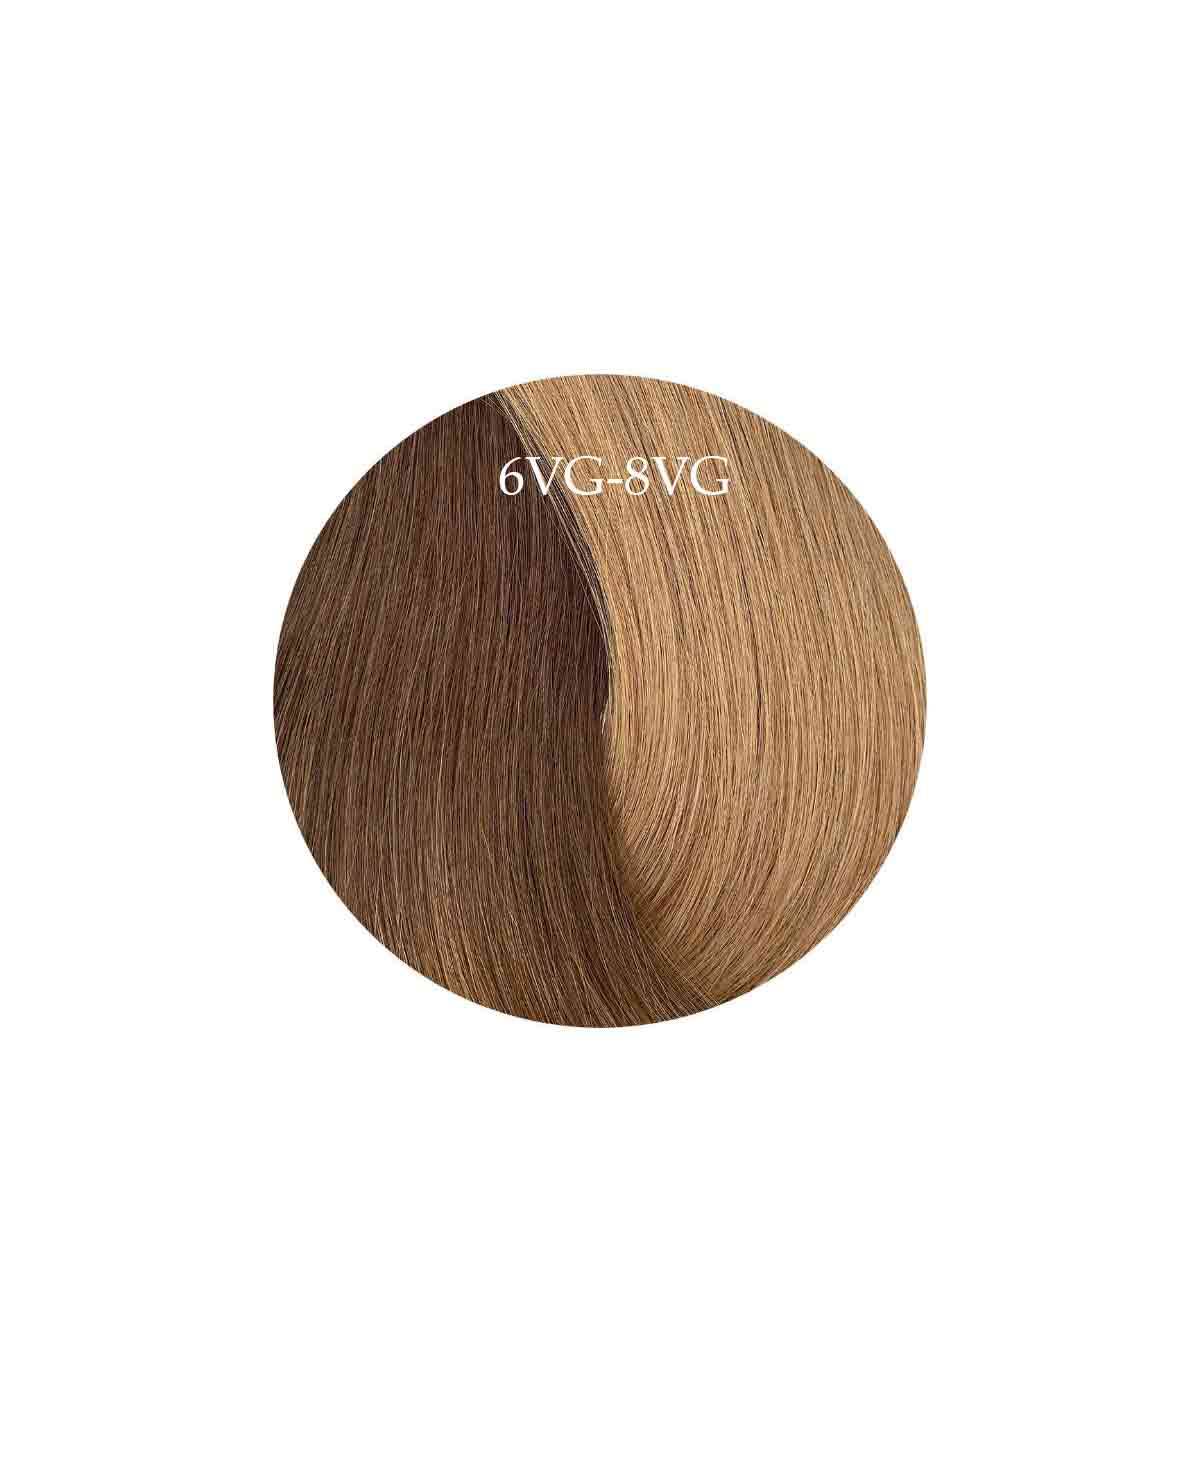 Showpony 45-50cm (20") Skin Weft Extensions - Ombre - 6VG-8VG Cool Brown